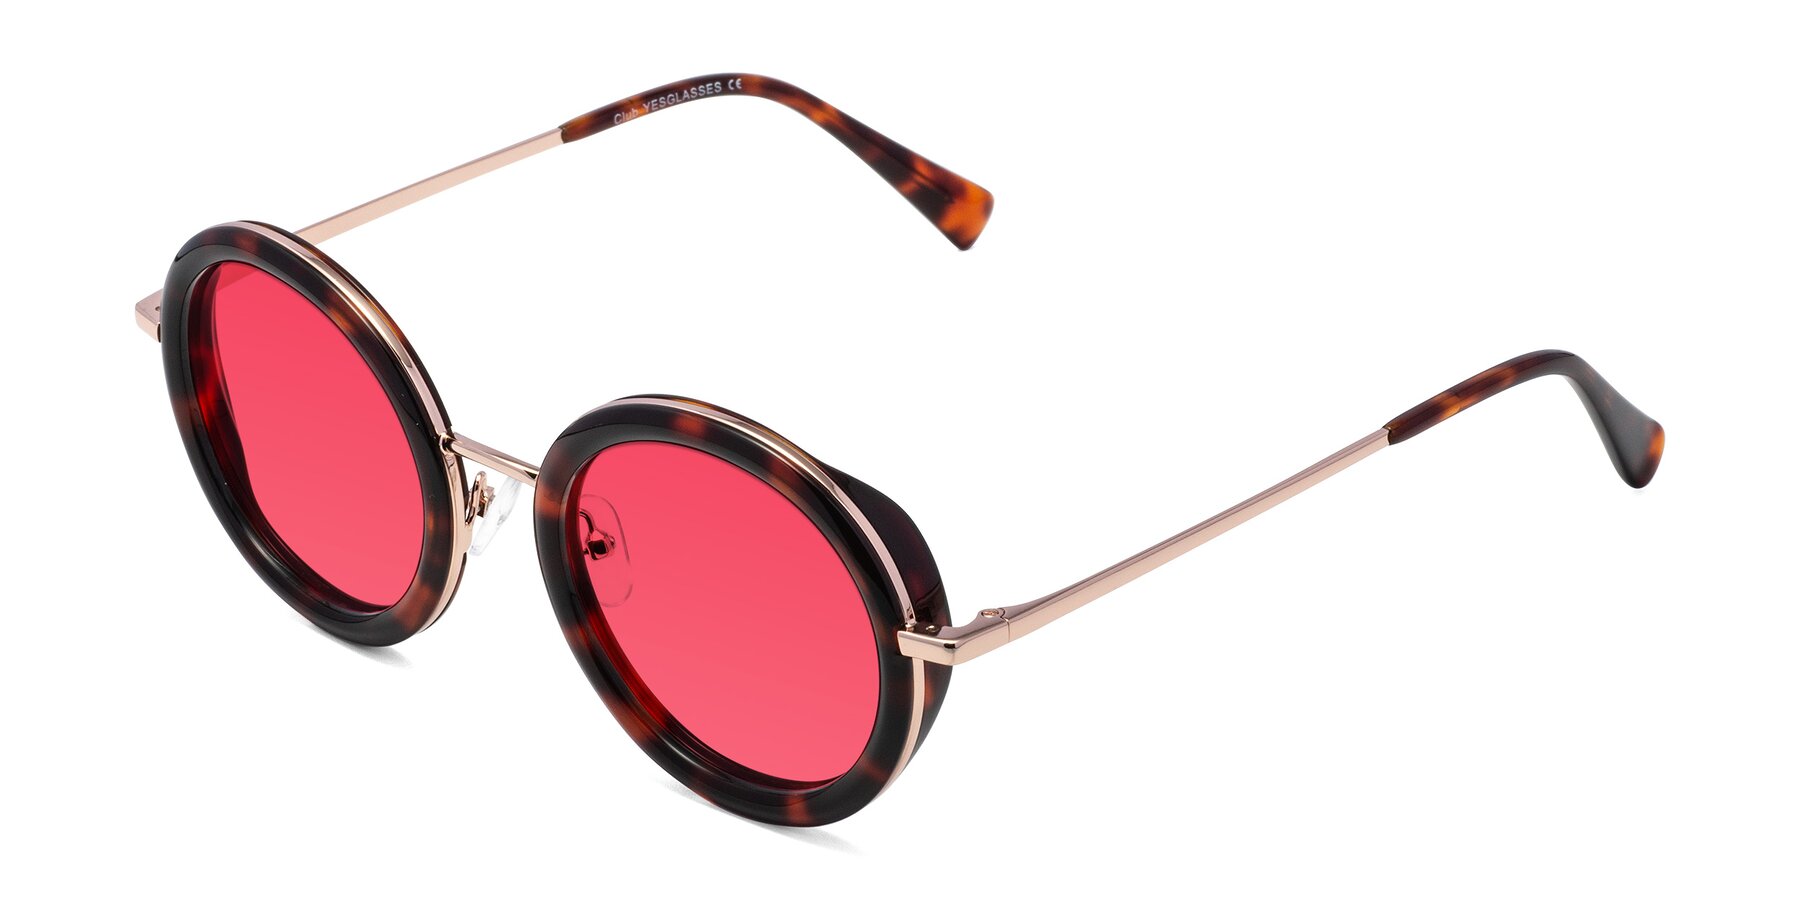 Angle of Club in Tortoise-Rose Gold with Red Tinted Lenses